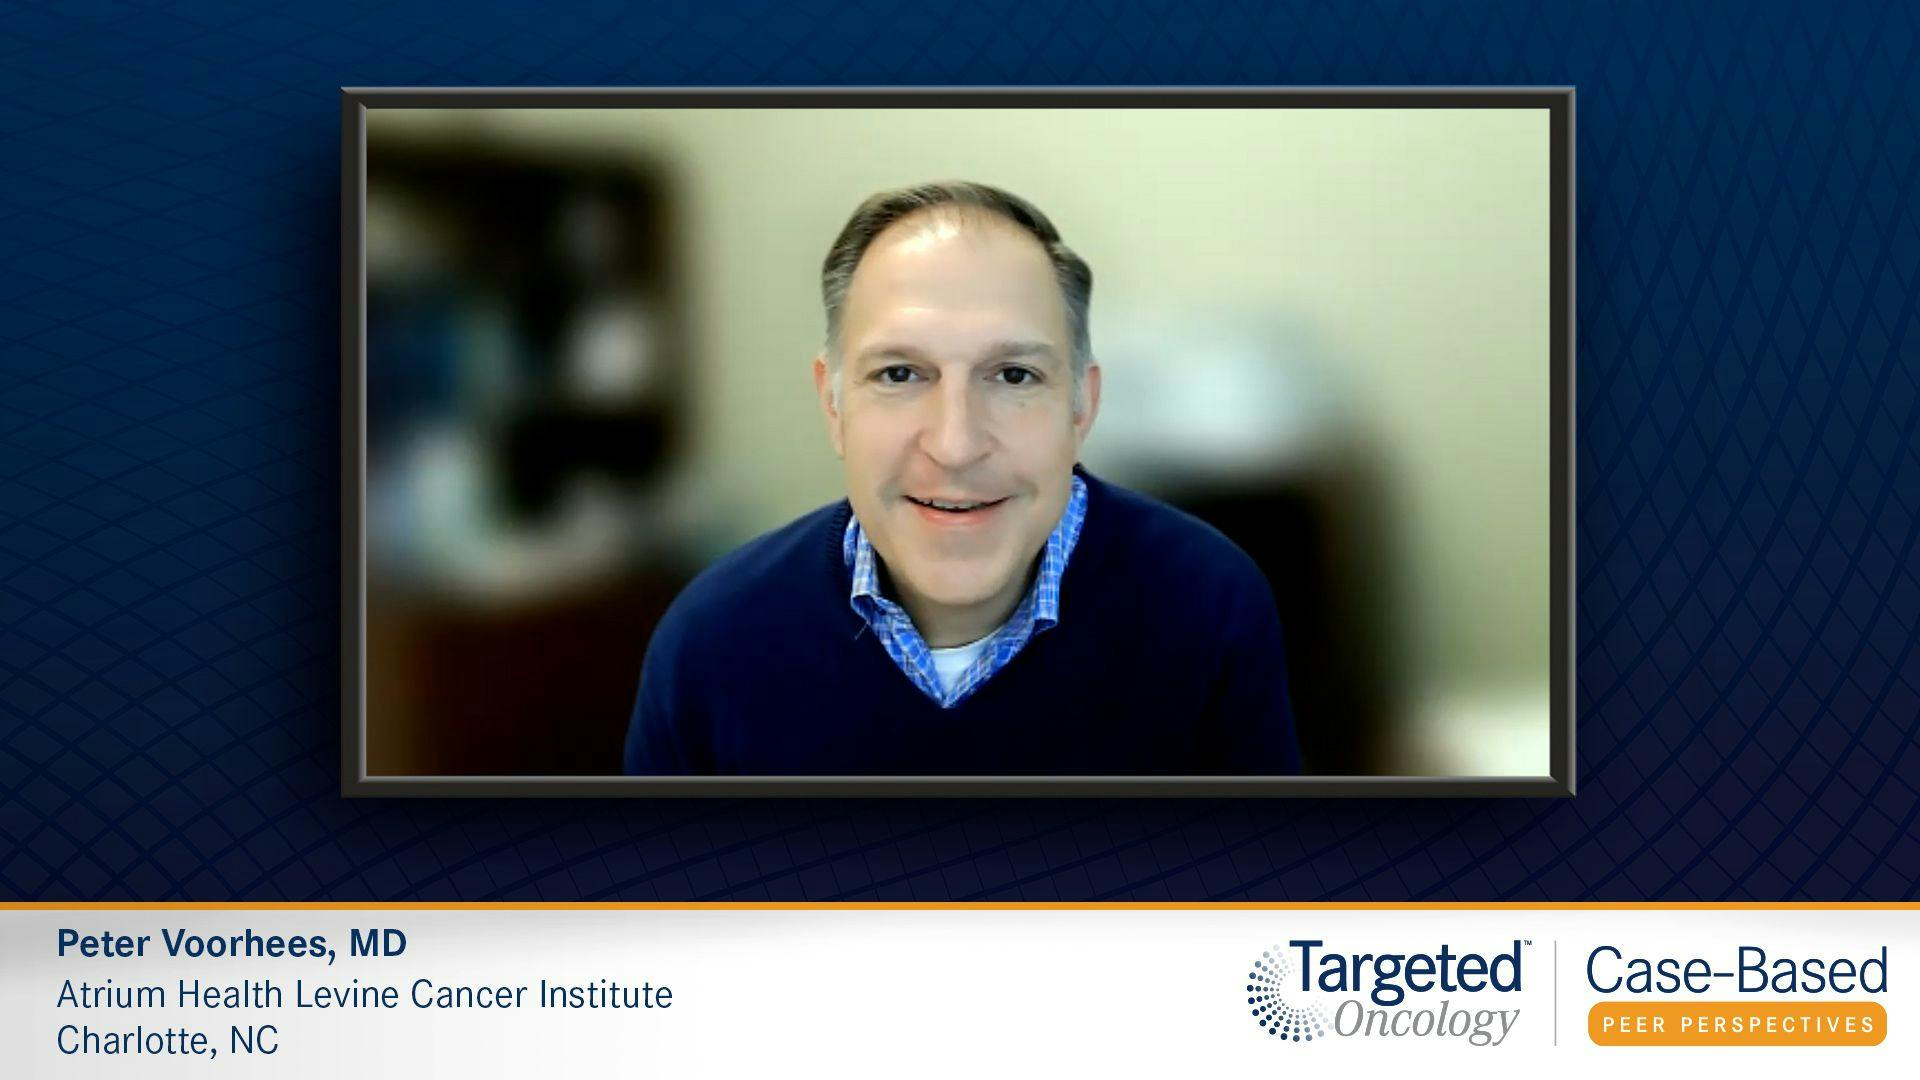 Advice to Community Oncologists Treating with Bispecifics